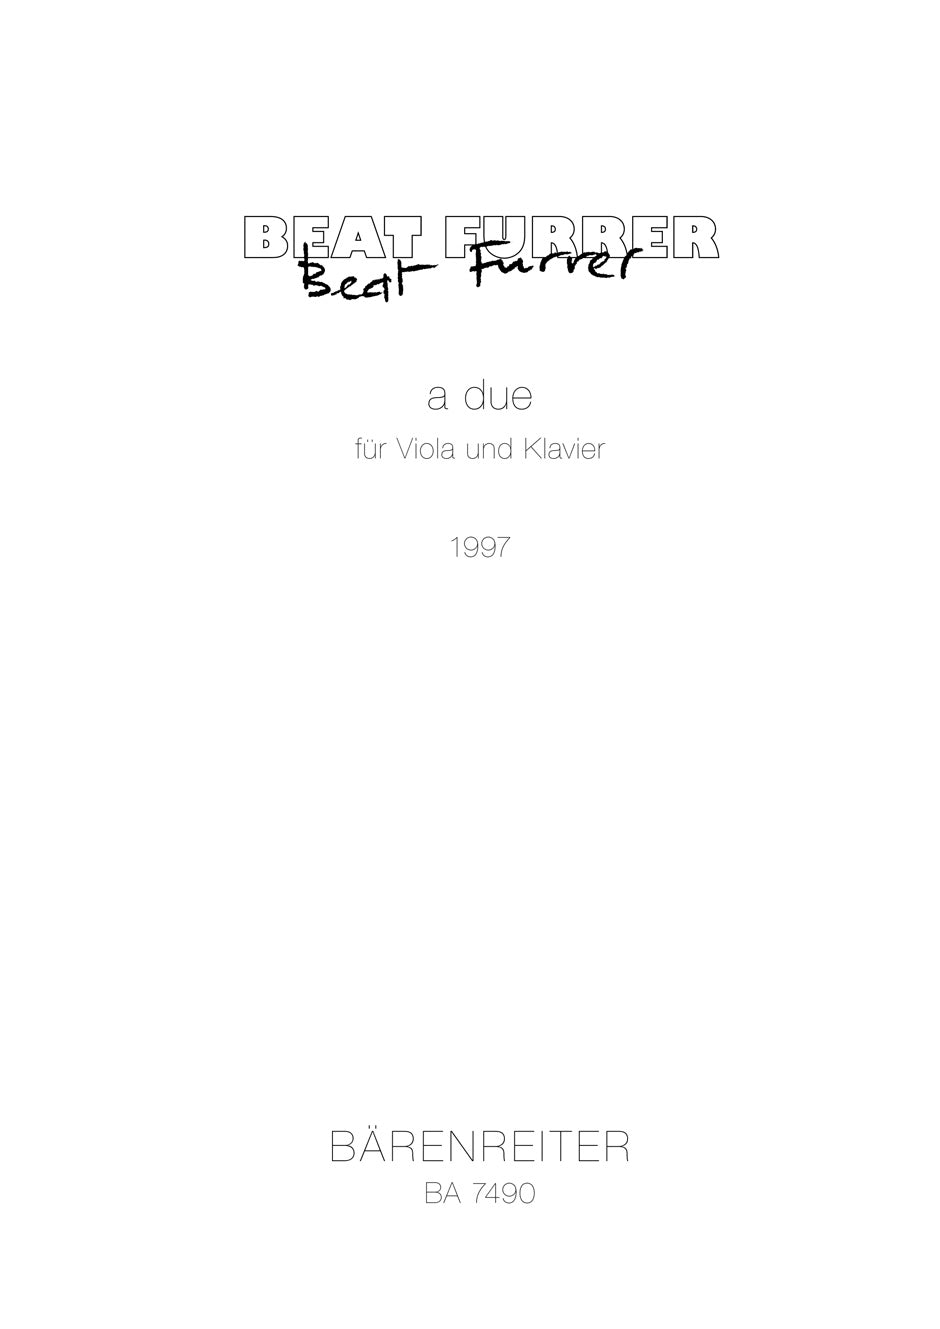 Furrer: a due for Viola and Piano